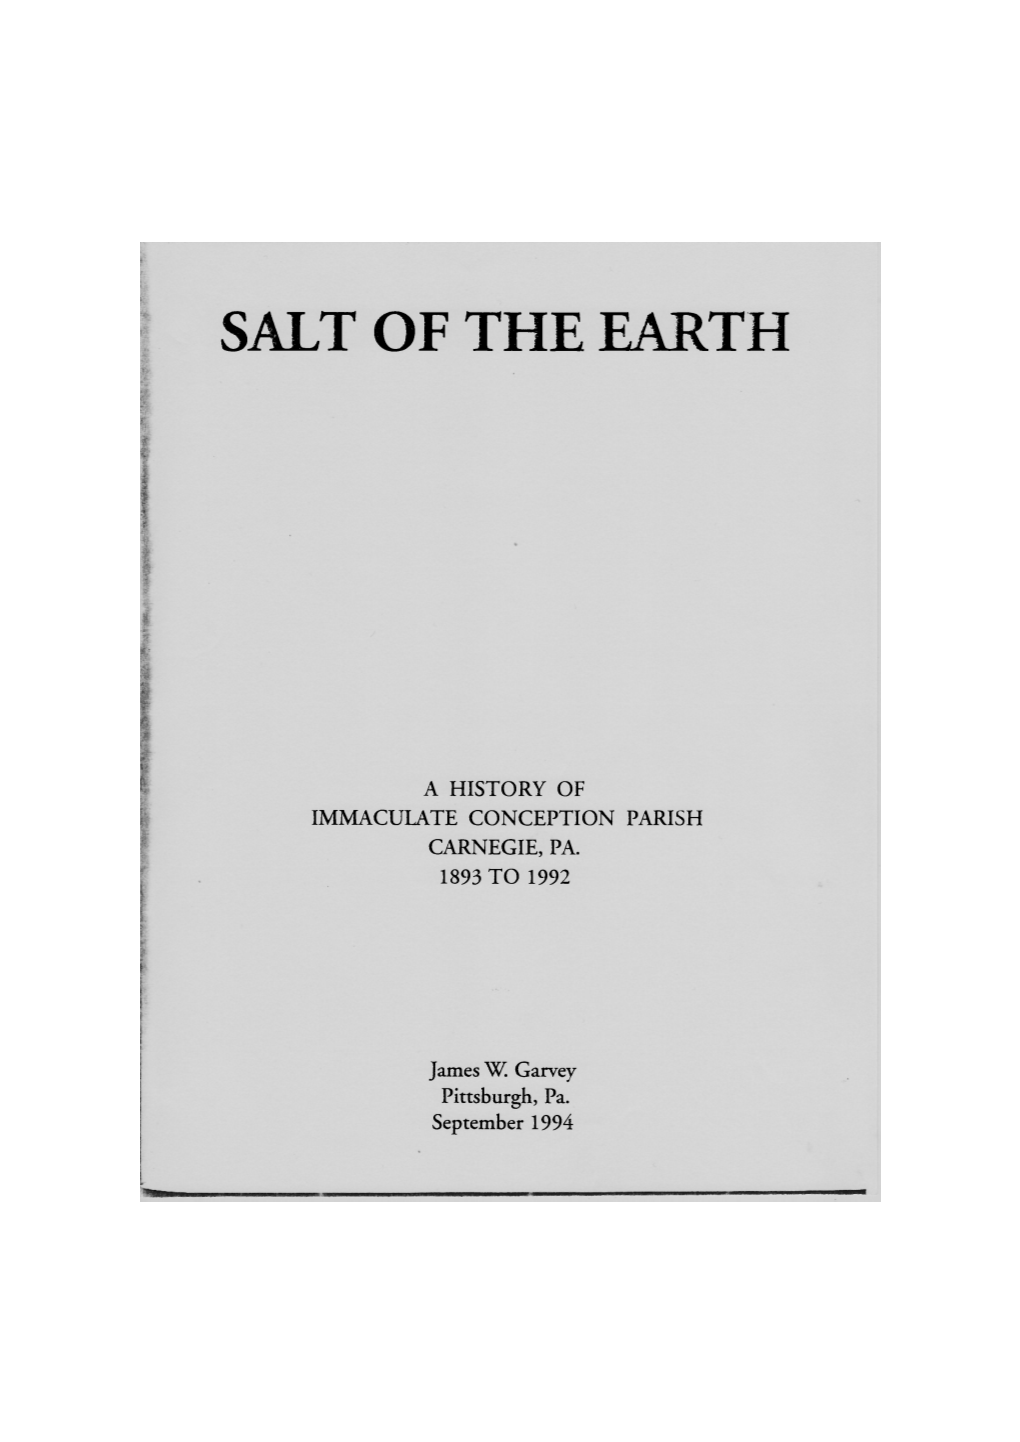 "Salt of the Earth". a History of Immaculate